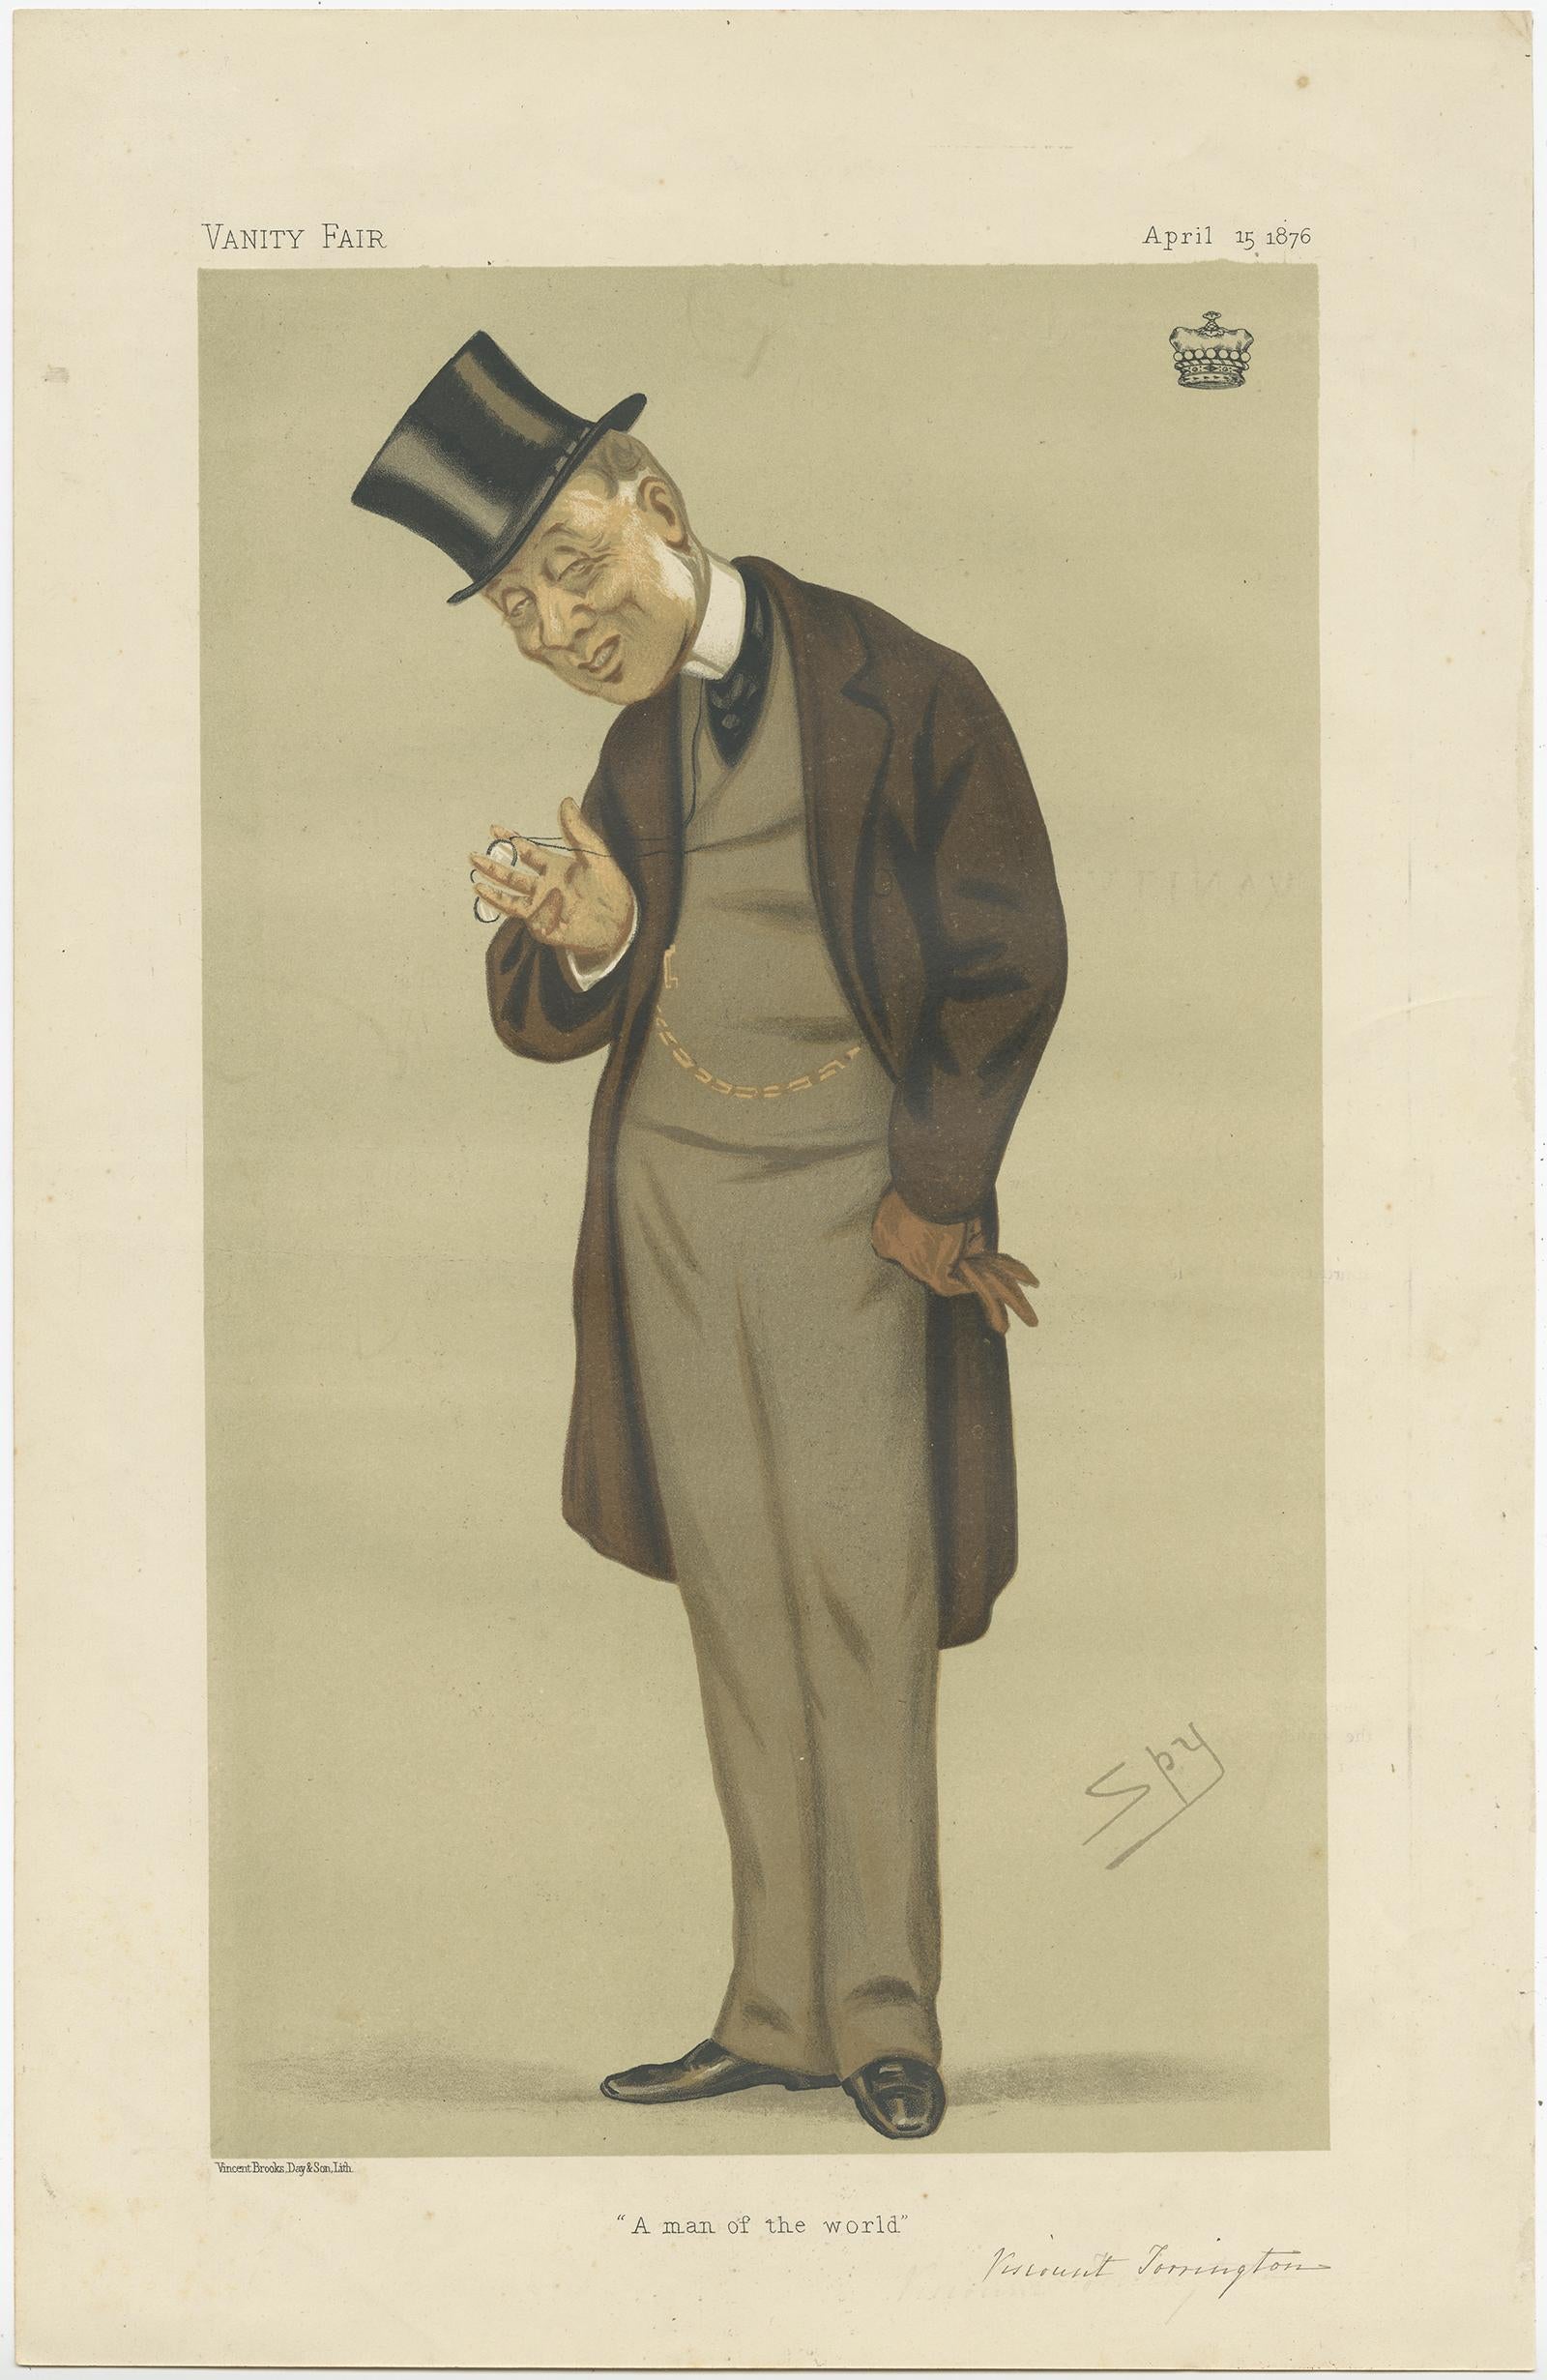 19th Century Antique Print of Viscount Torrington Published in the Vanity Fair, 1876 For Sale